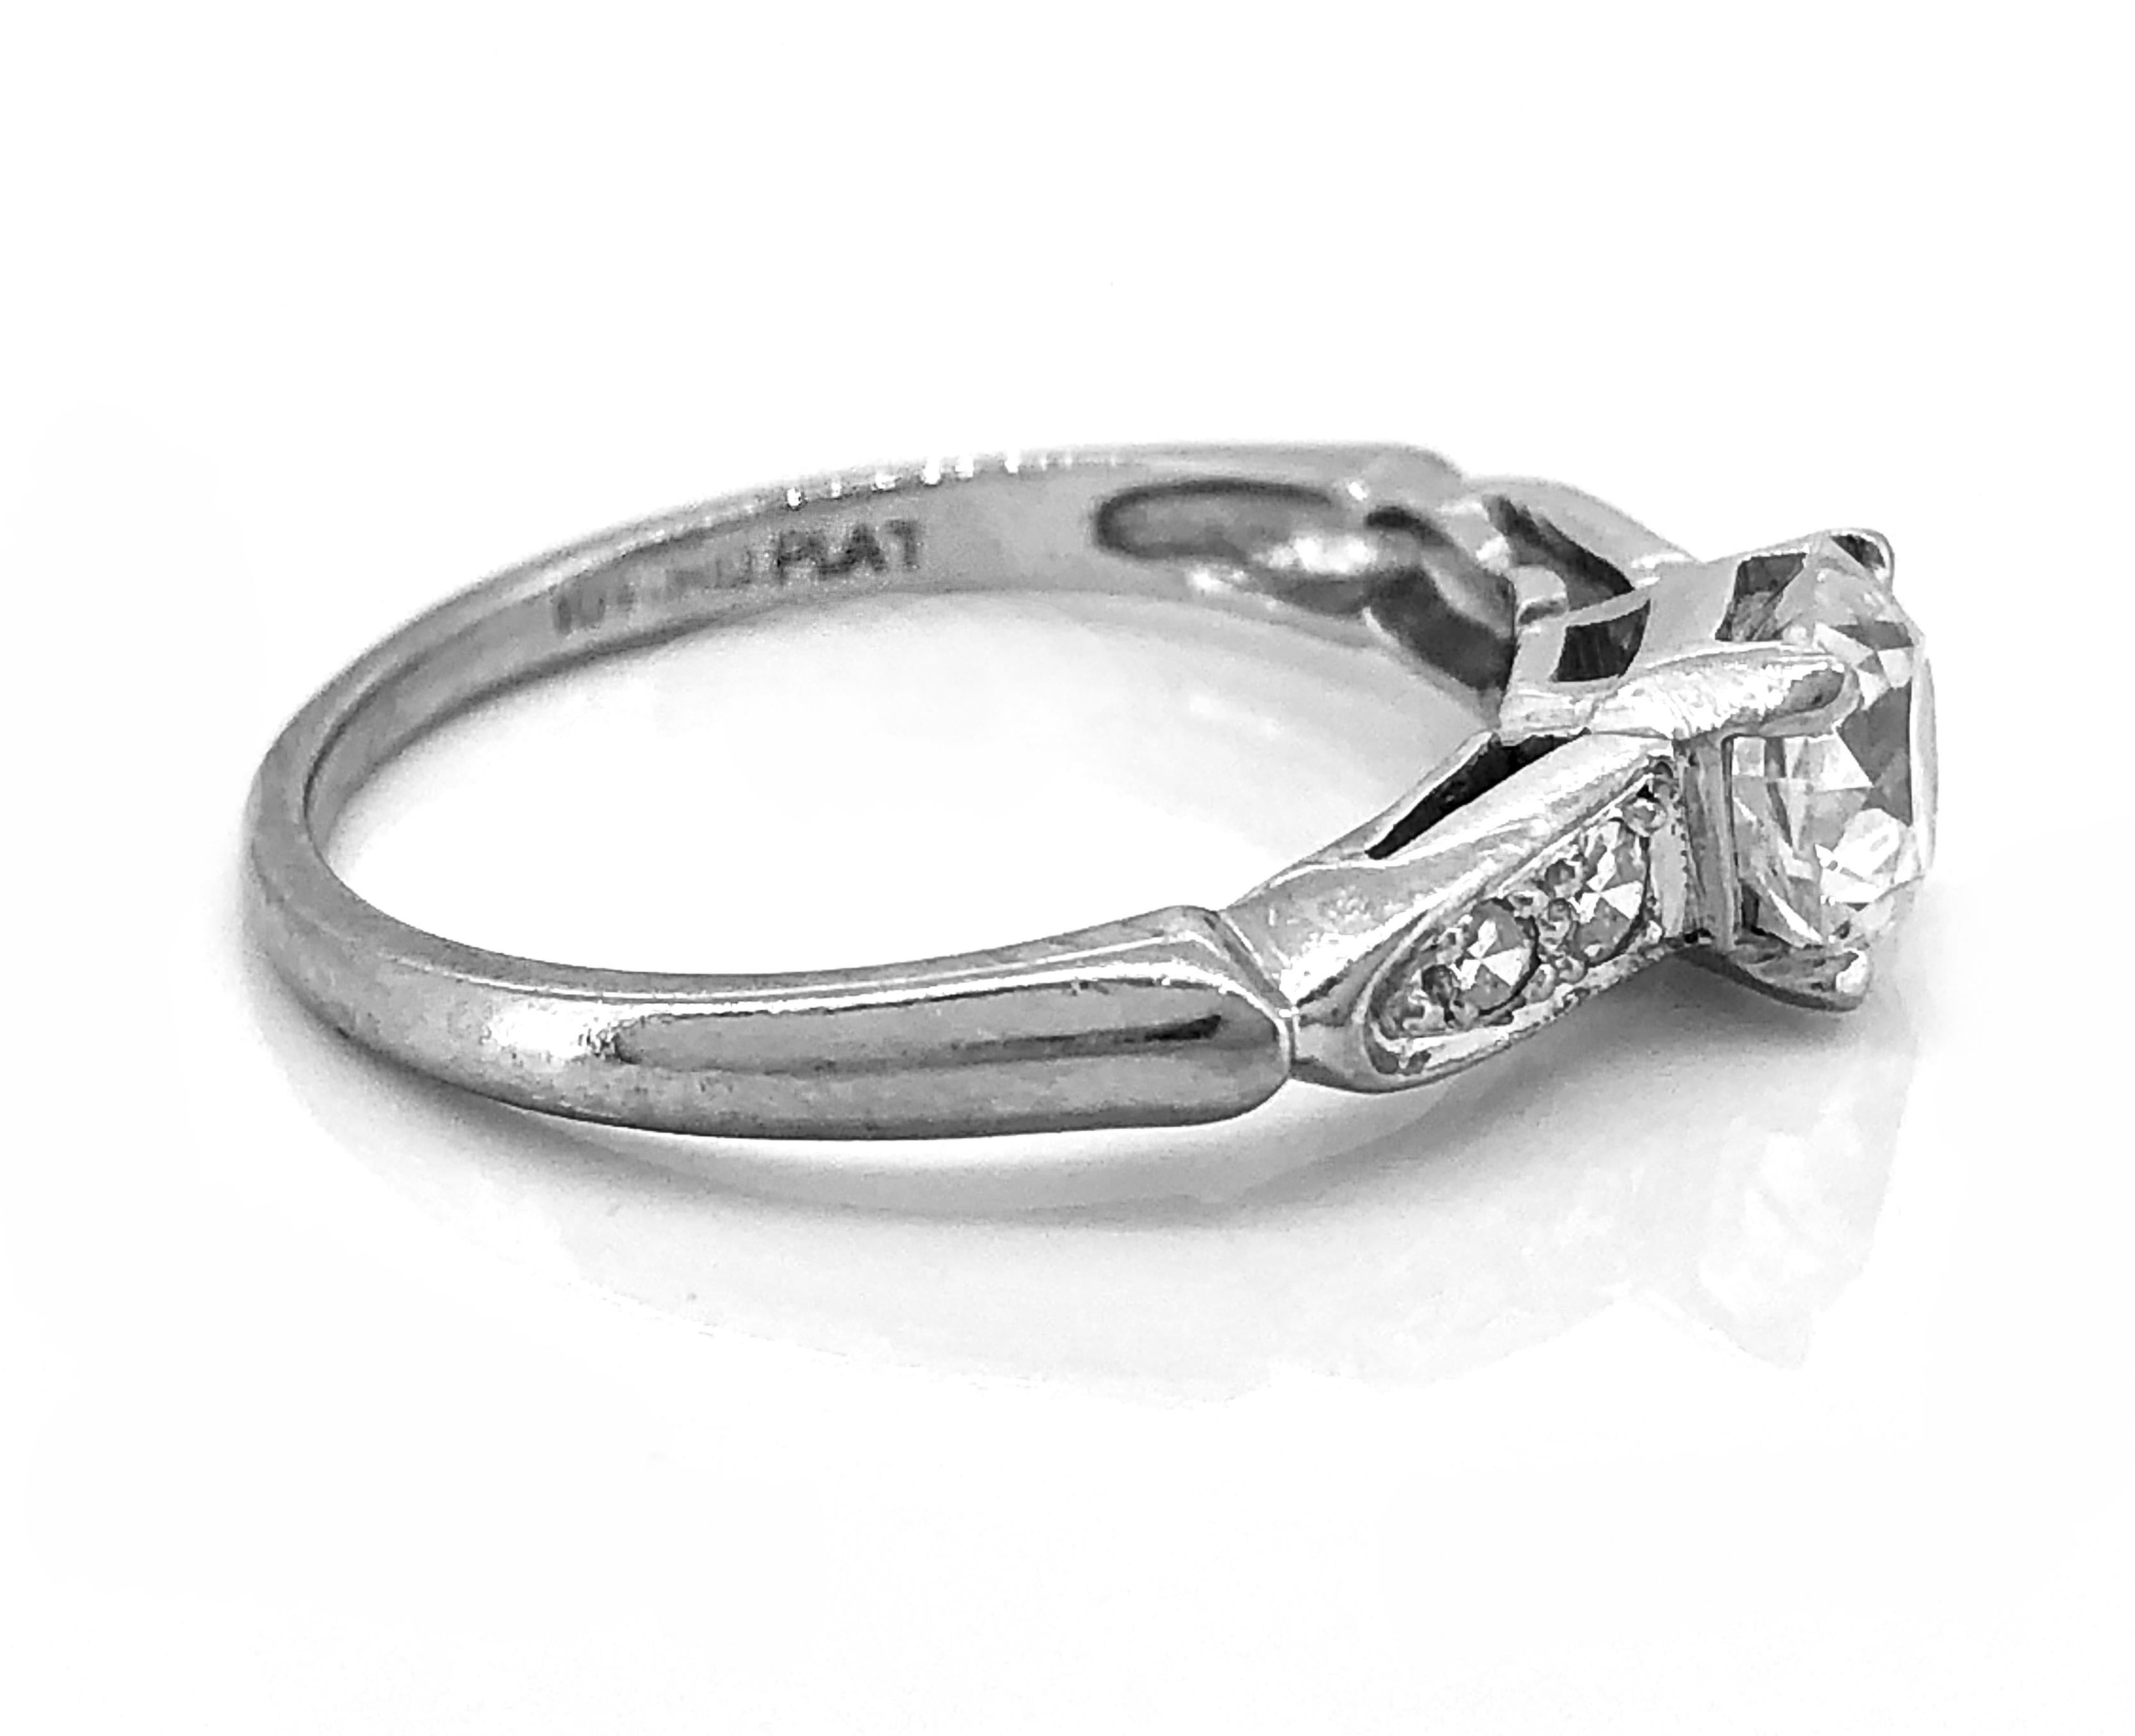 A gorgeous Art Deco Platinum & Diamond Antique Engagement Ring. It features a scintillating .70ct. apx. VS2 clarity and H color European cut diamond. The center diamond is accented with .08ct. T.W. apx. single cut diamond melee. This ring is